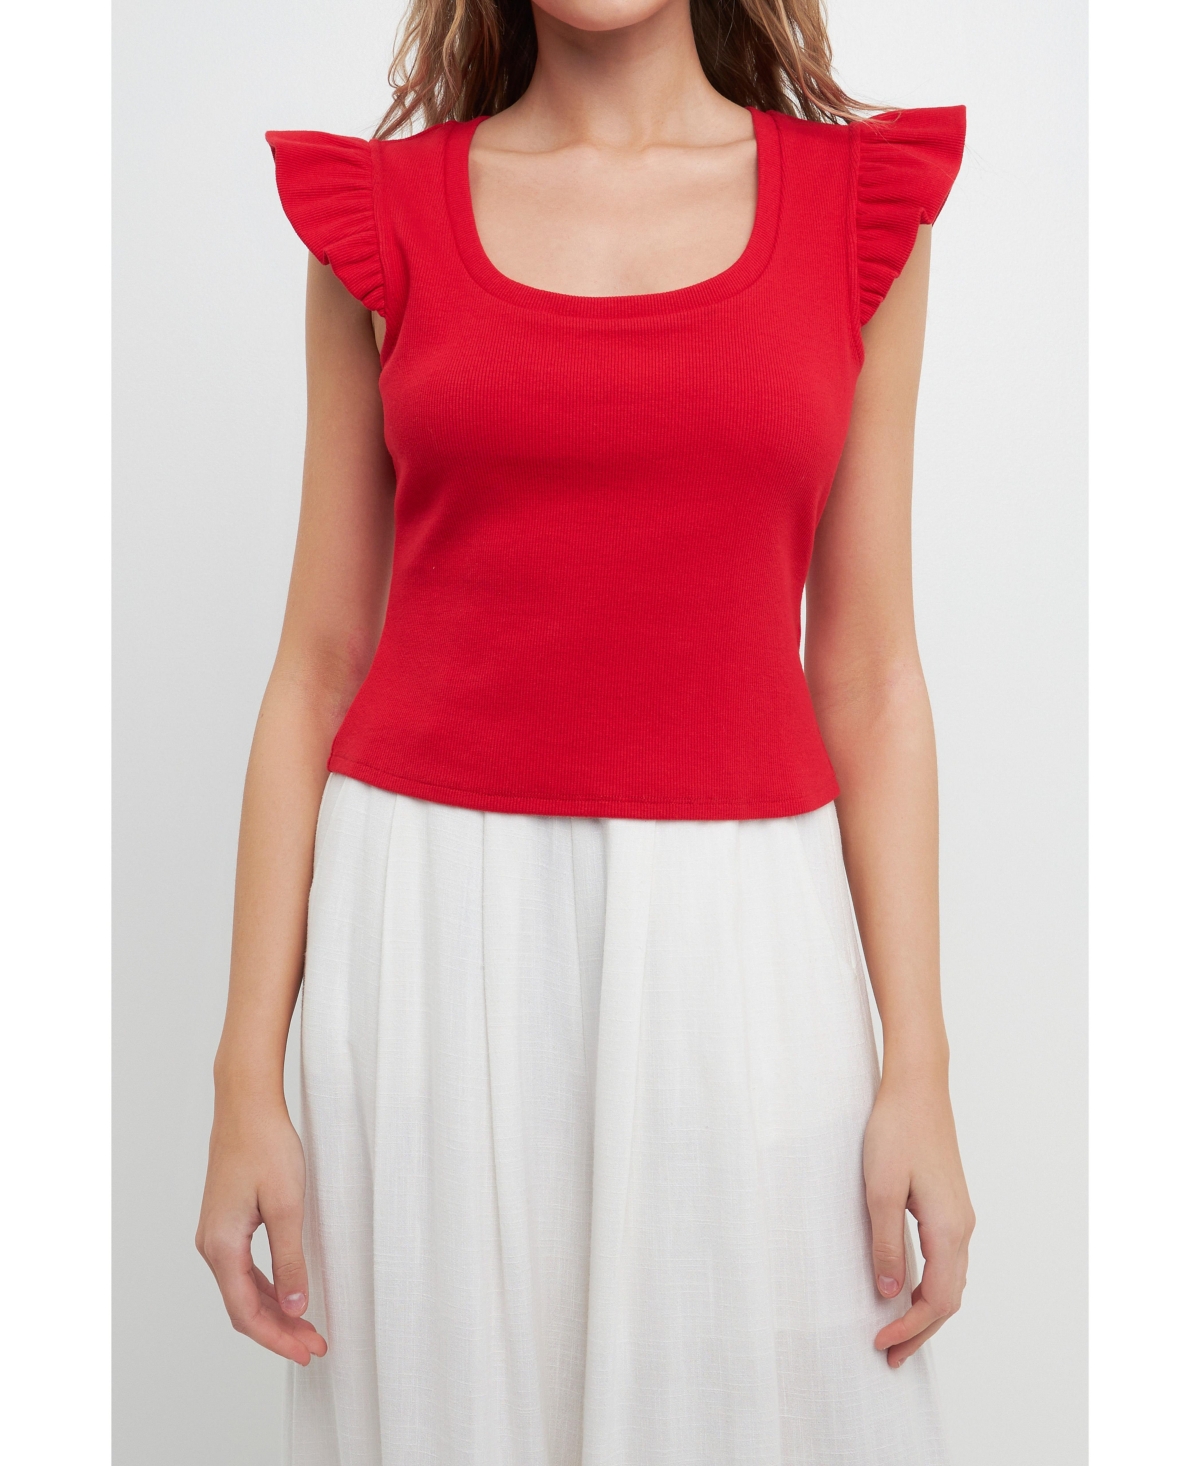 Free The Roses Women's U-neckline Ribbed Knit Top